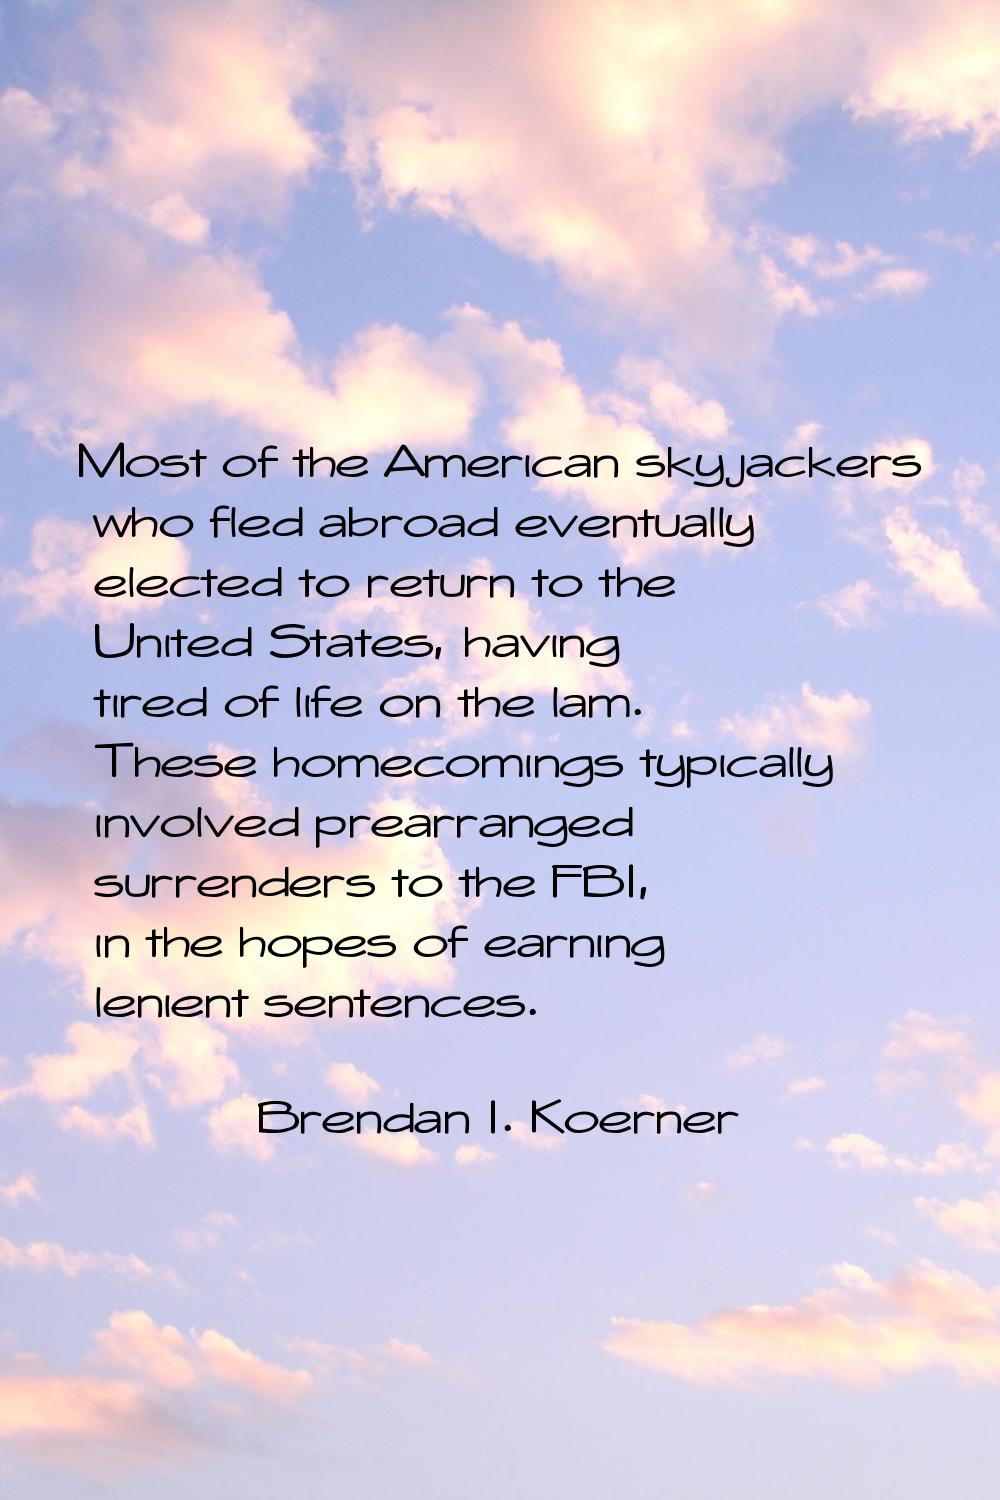 Most of the American skyjackers who fled abroad eventually elected to return to the United States, 